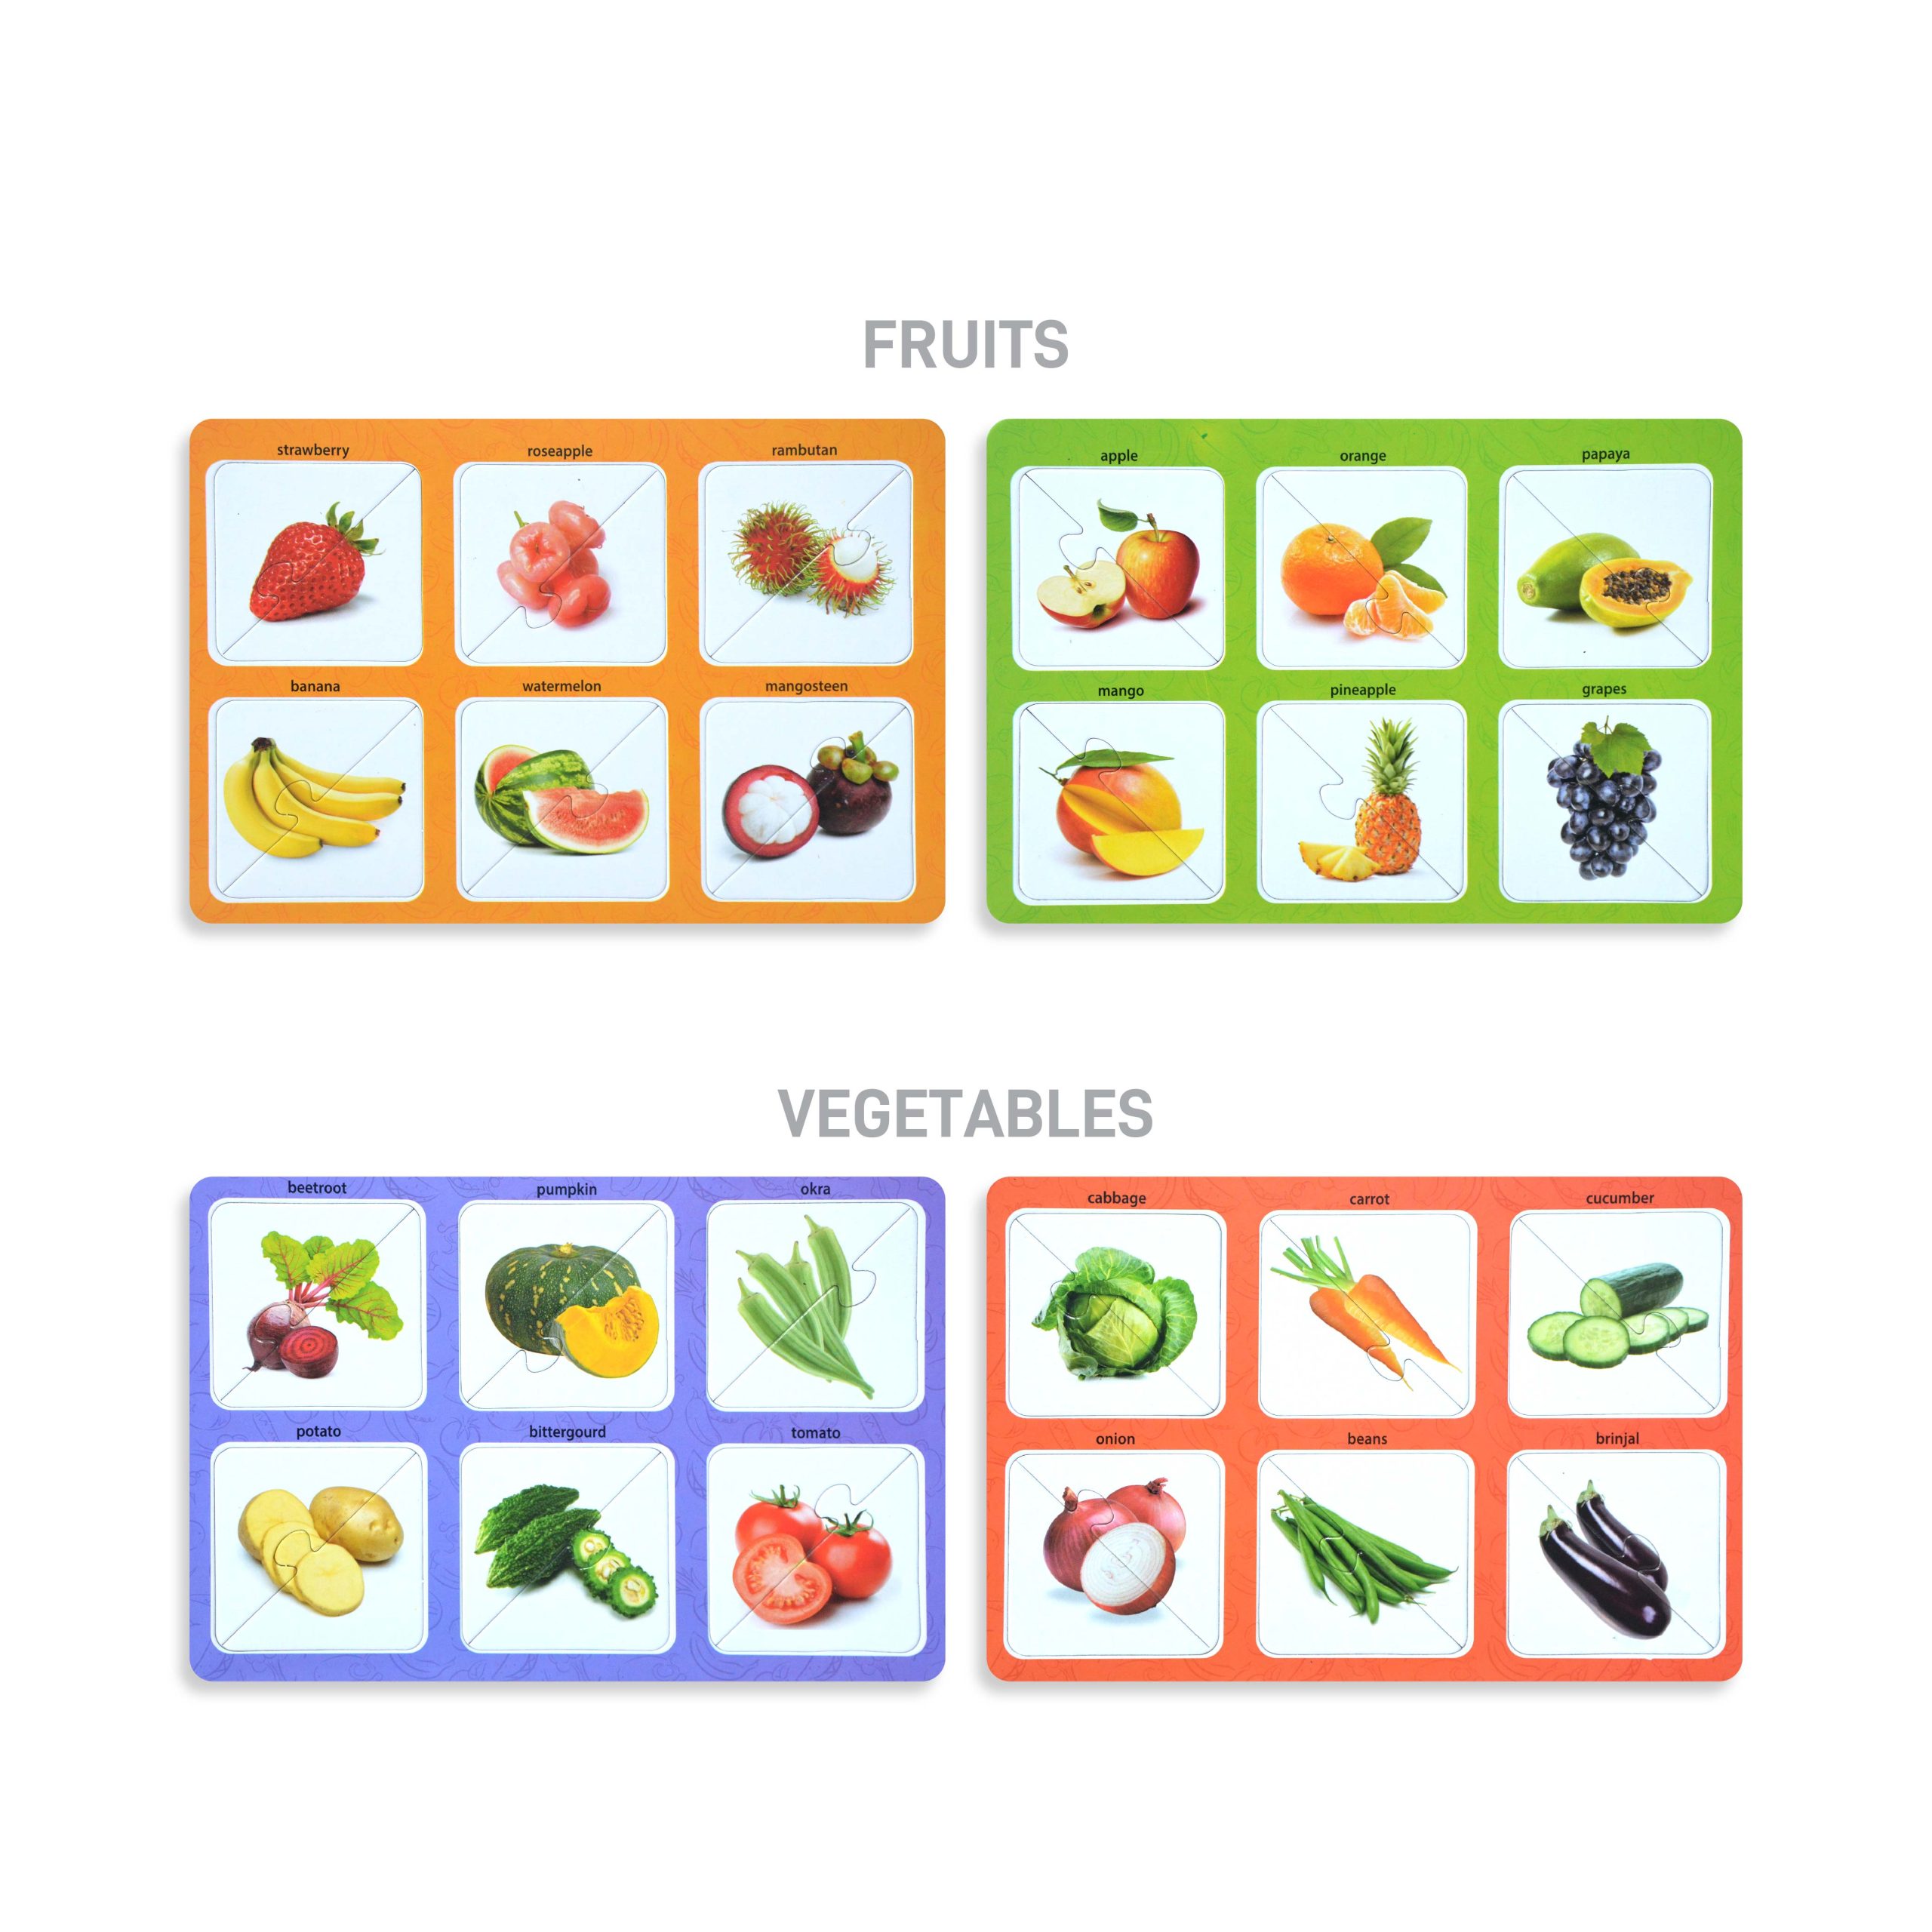 TY5166 FRUITS VEGETABLES BOX 03 scaled